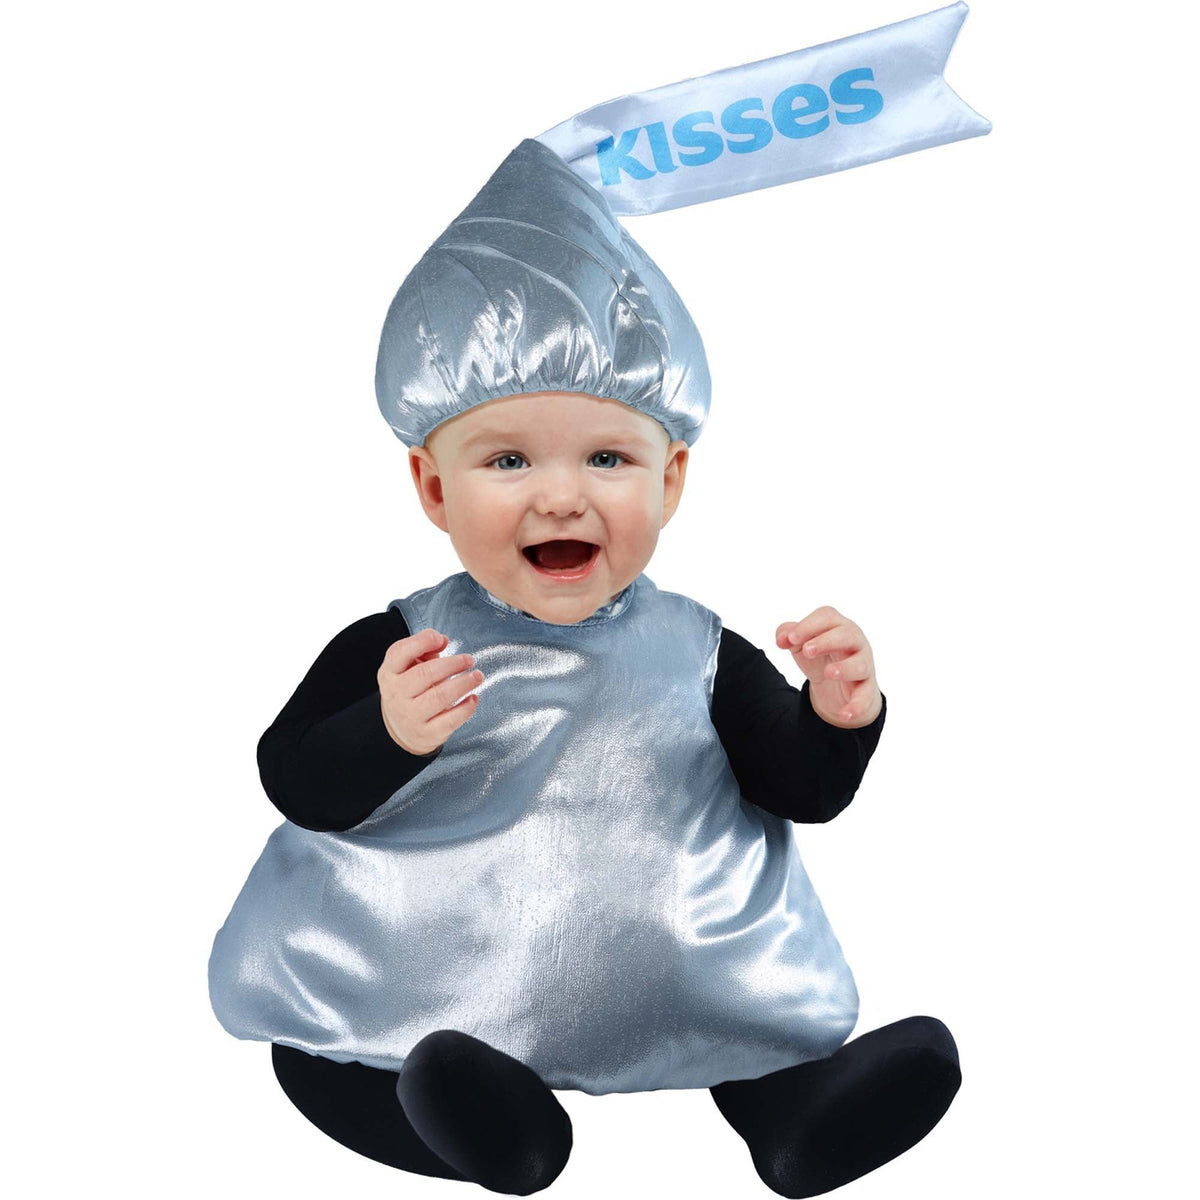 RUBIES II (Ruby Slipper Sales) Costumes Hershey Kiss Costume for Babies and Toddlers